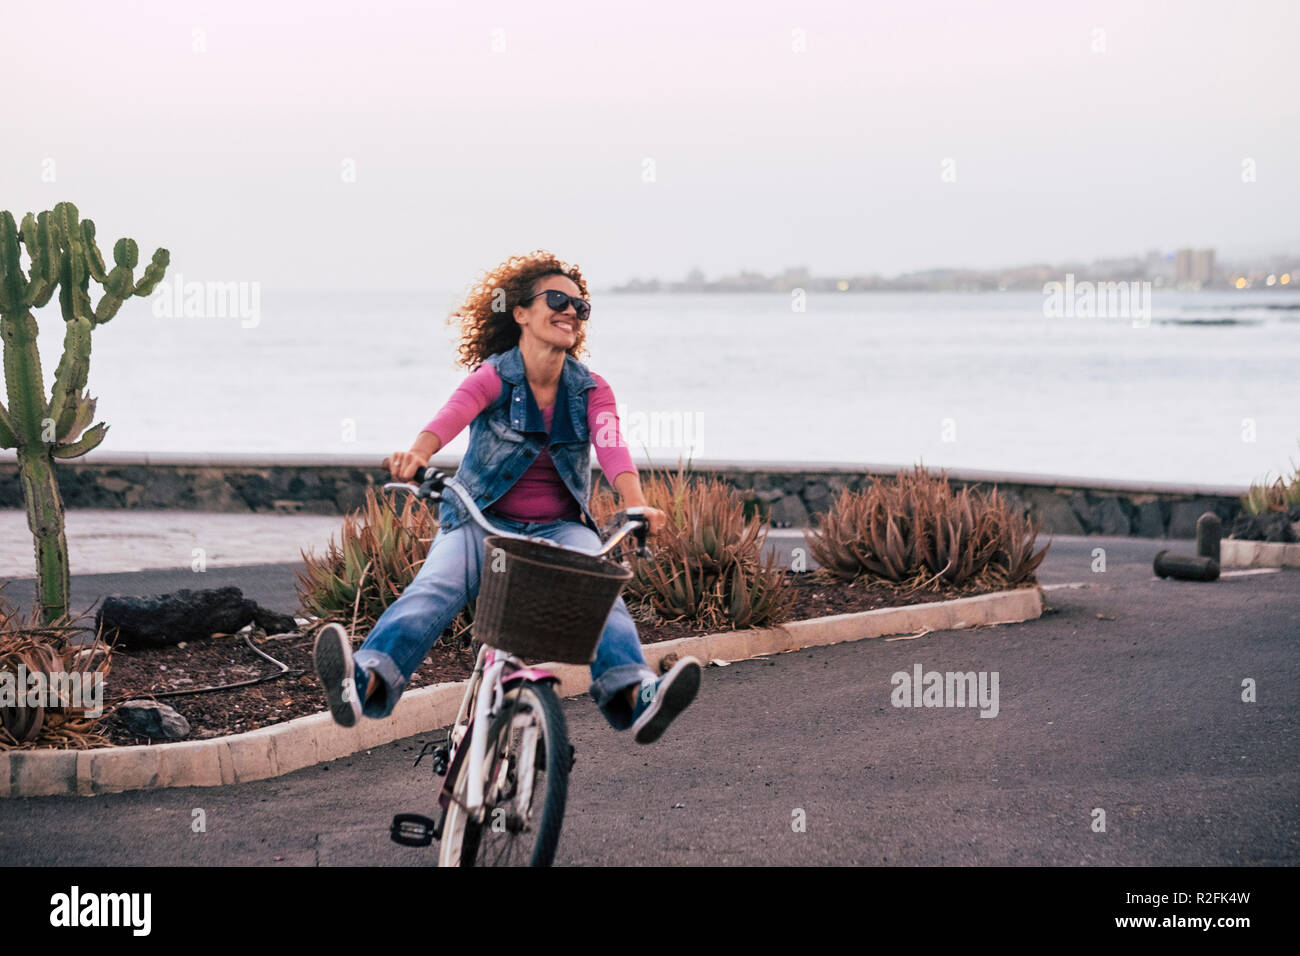 happiness and joyful for curly beautiful lady go on a bybicle opening legs and having a lot of fun. freedom and enjoying life concept with cheerful people in outdoor leisure activity. Stock Photo